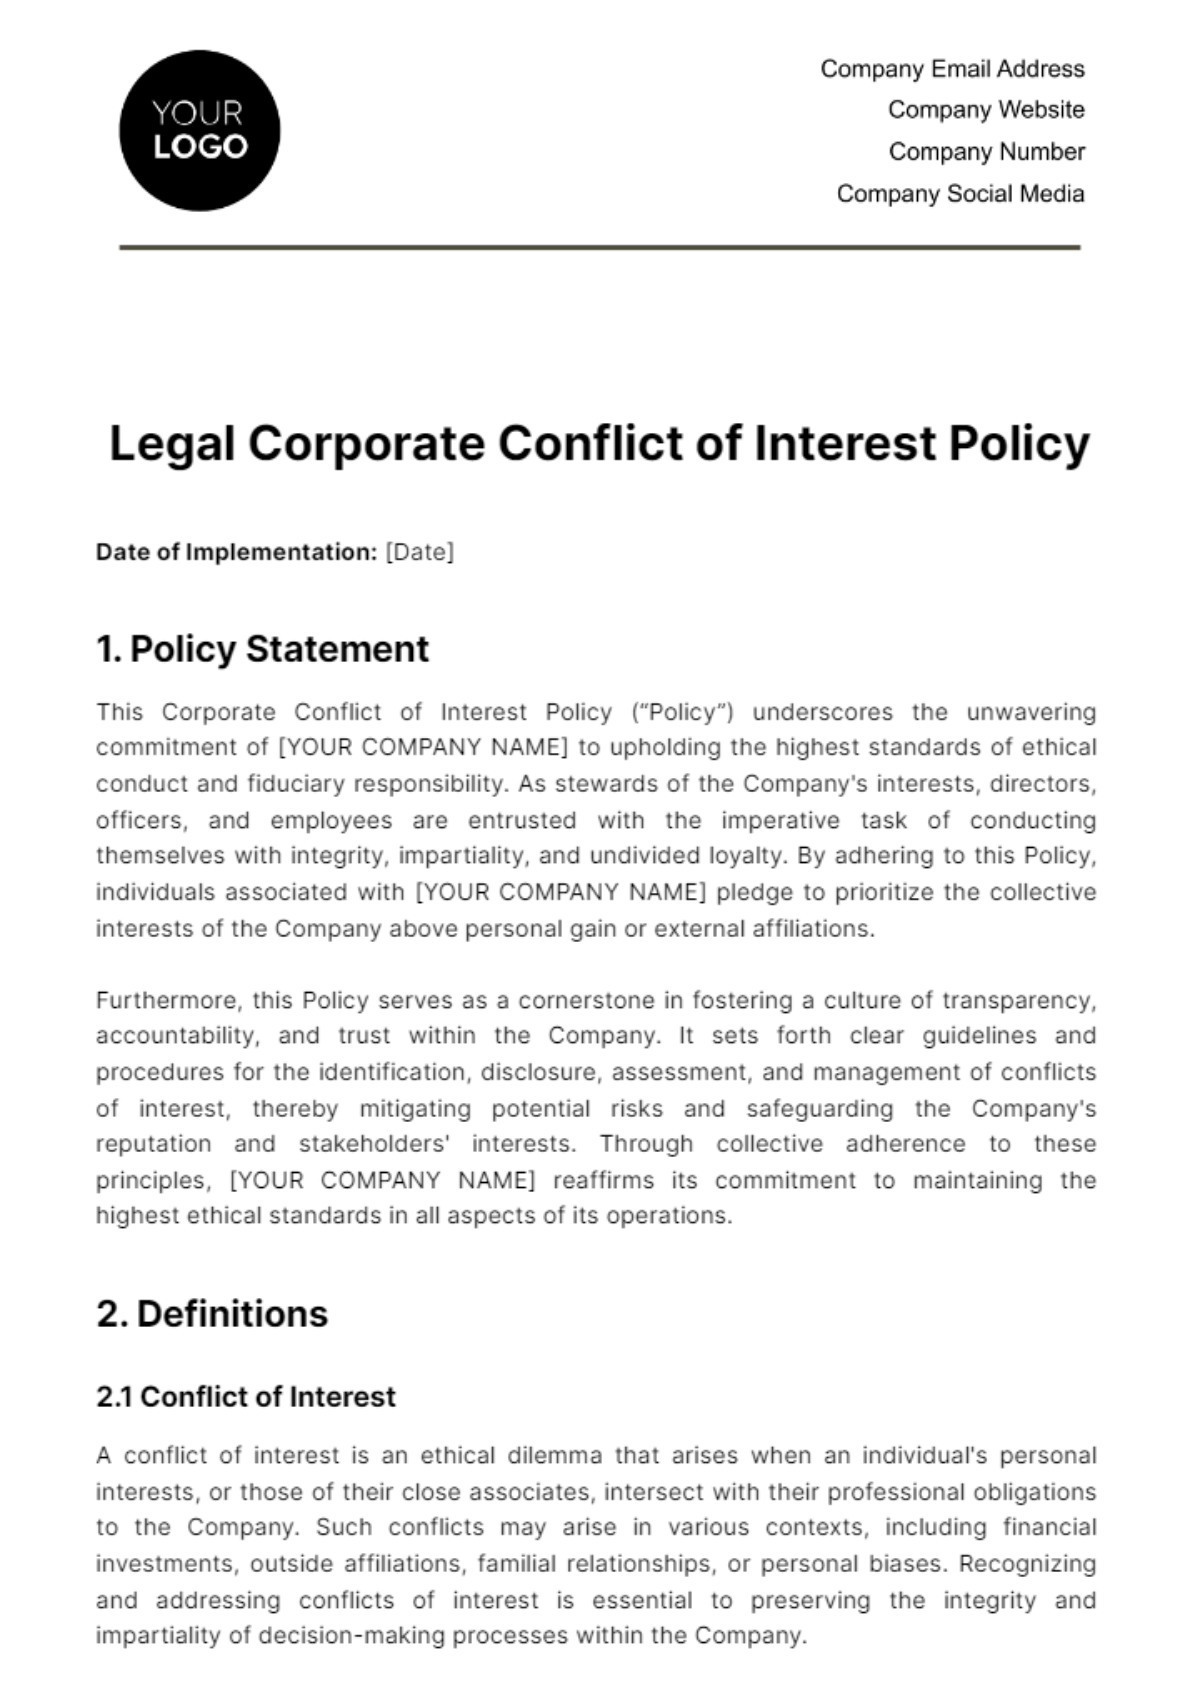 Legal Corporate Conflict of Interest Policy Template